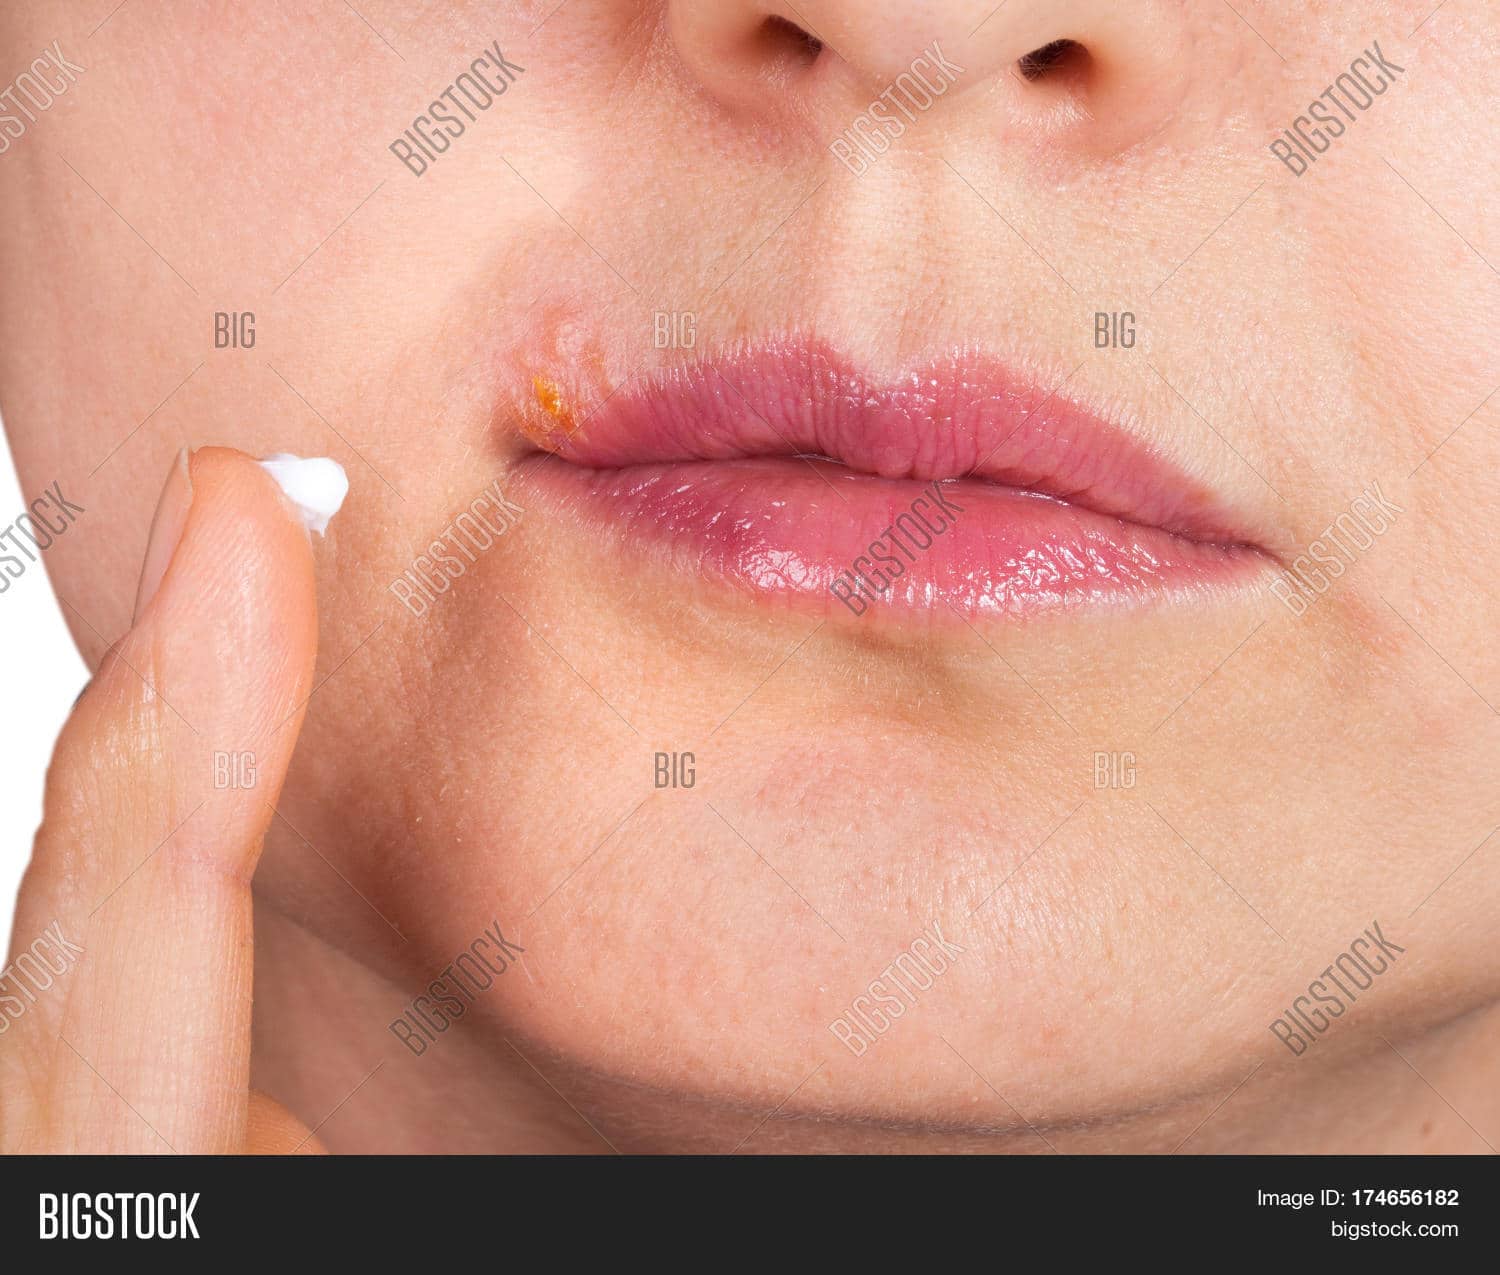 Herpes On Lip Close